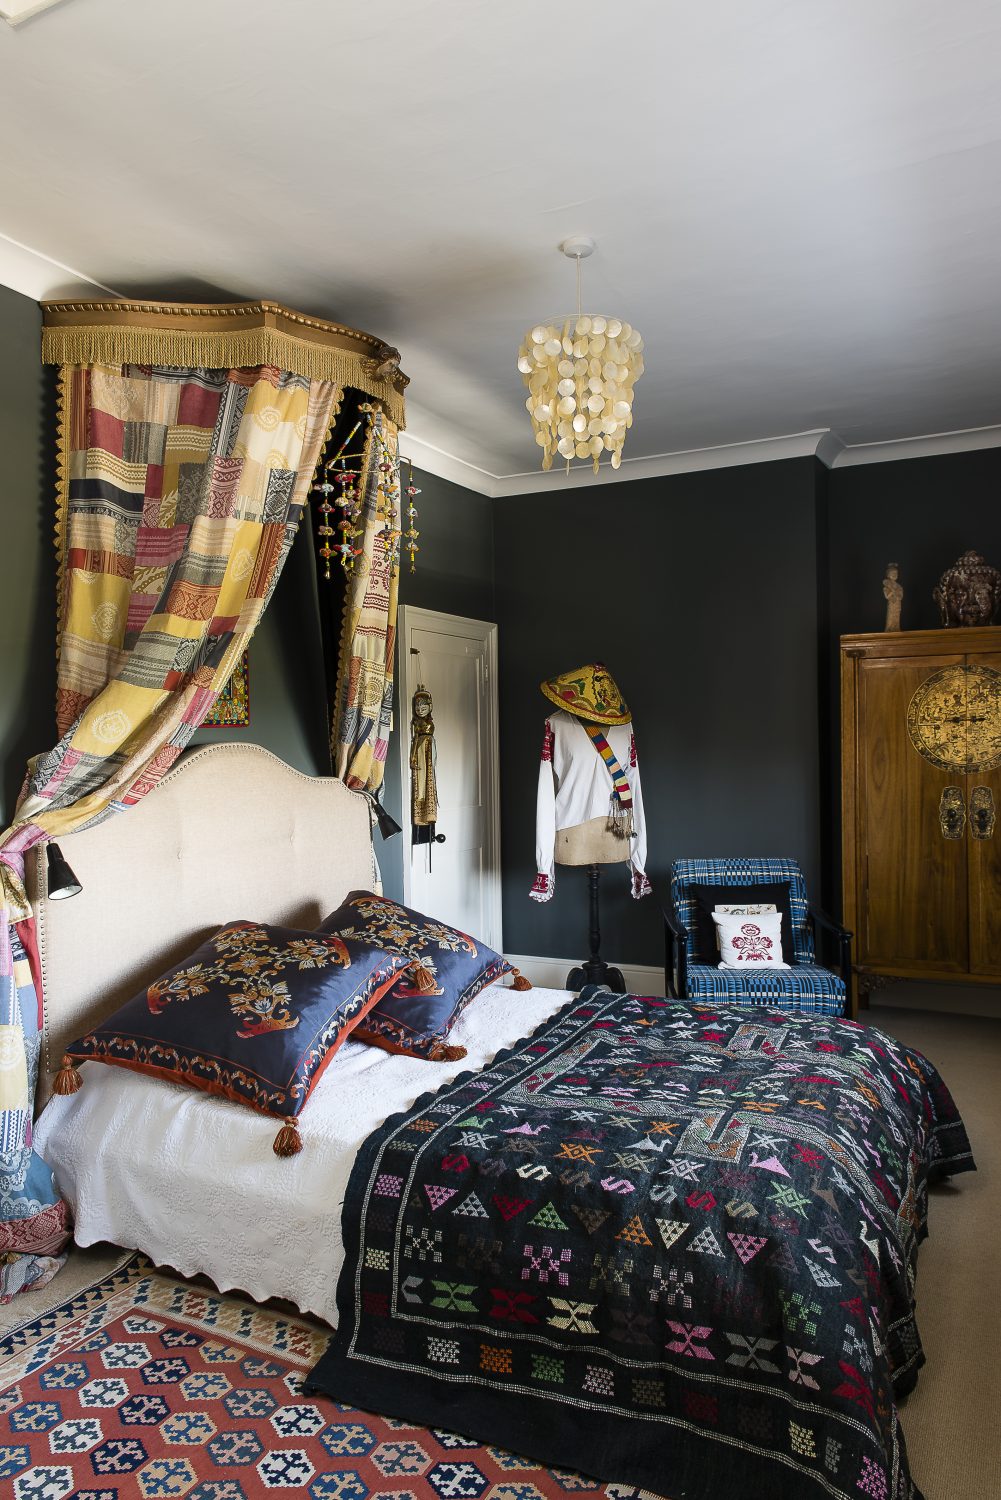 In the 'Traveller's Room' the patchwork bed canopy is made from remnants of Julia's fabrics. The walls are painted in Farrow & Ball Downpipe